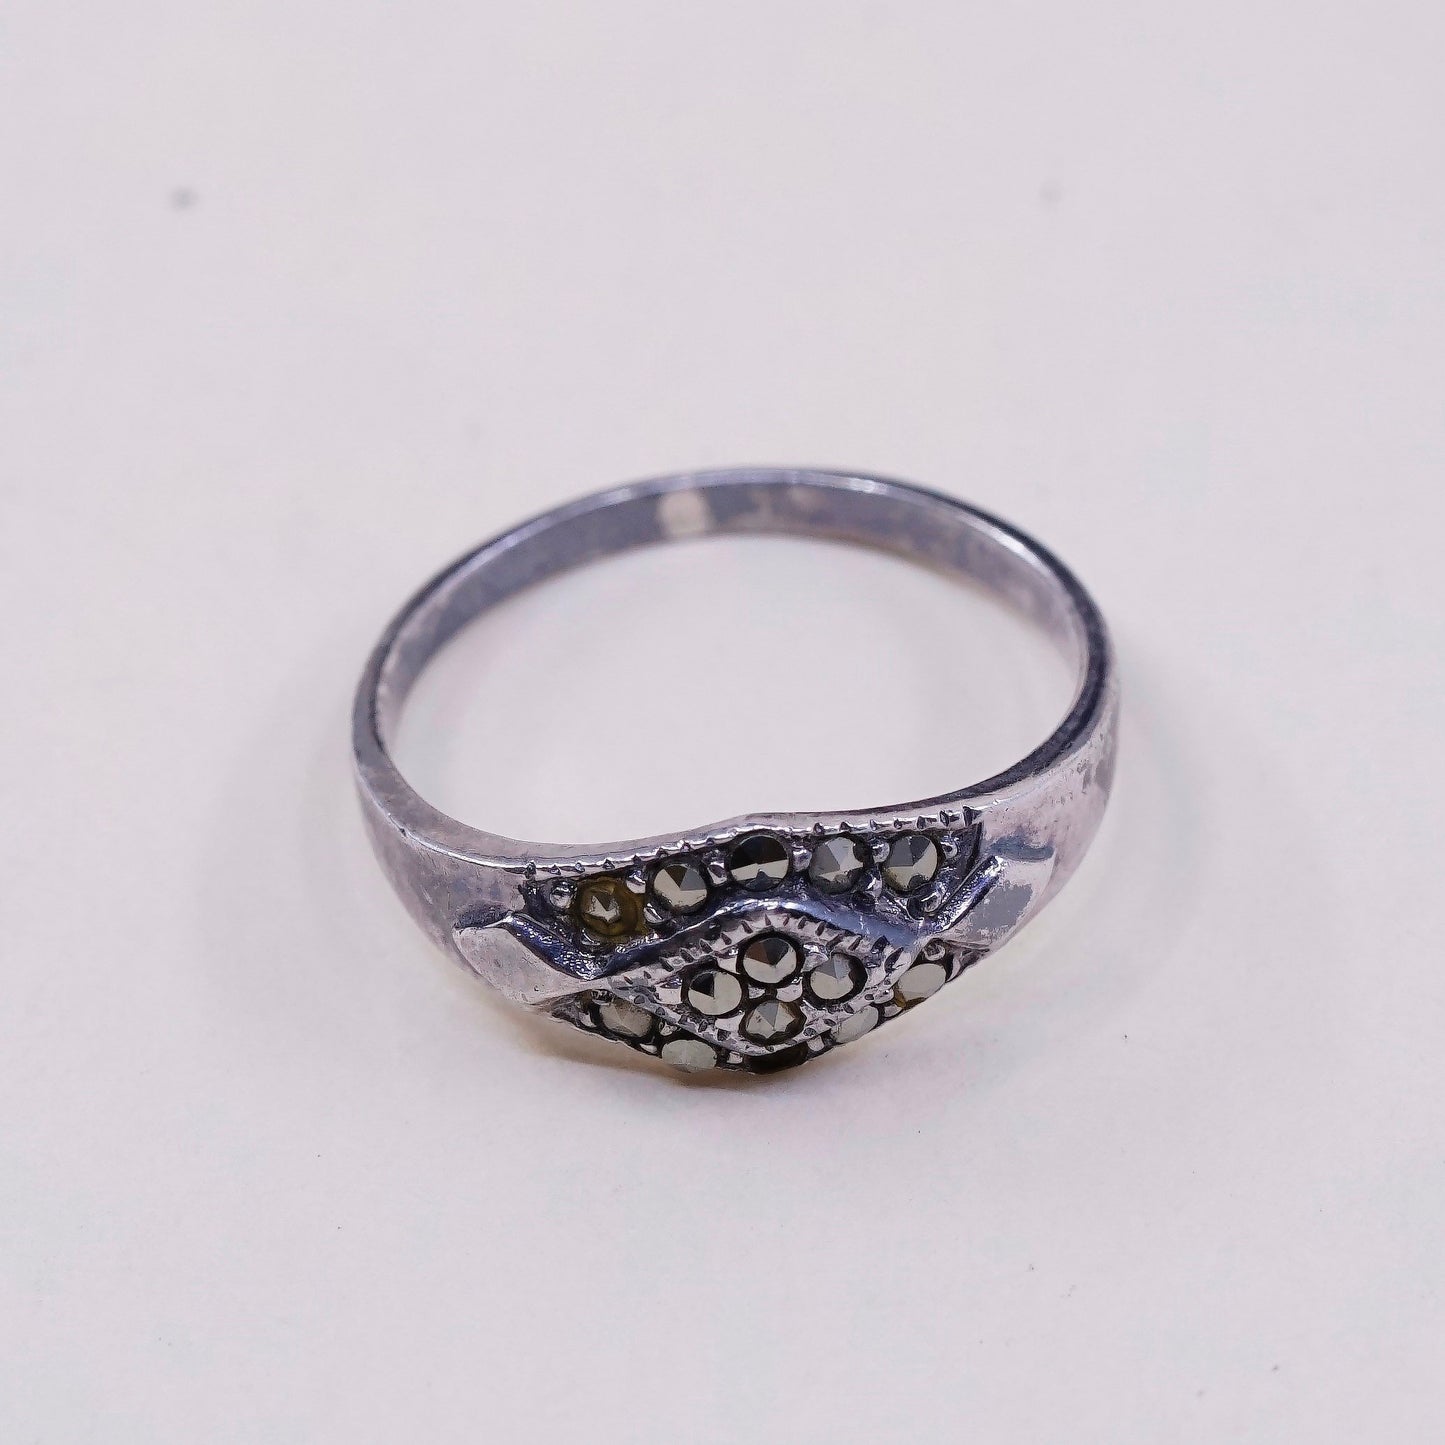 Size 6, Vintage Sterling 925 silver handmade ring with marcasite, stamped 925